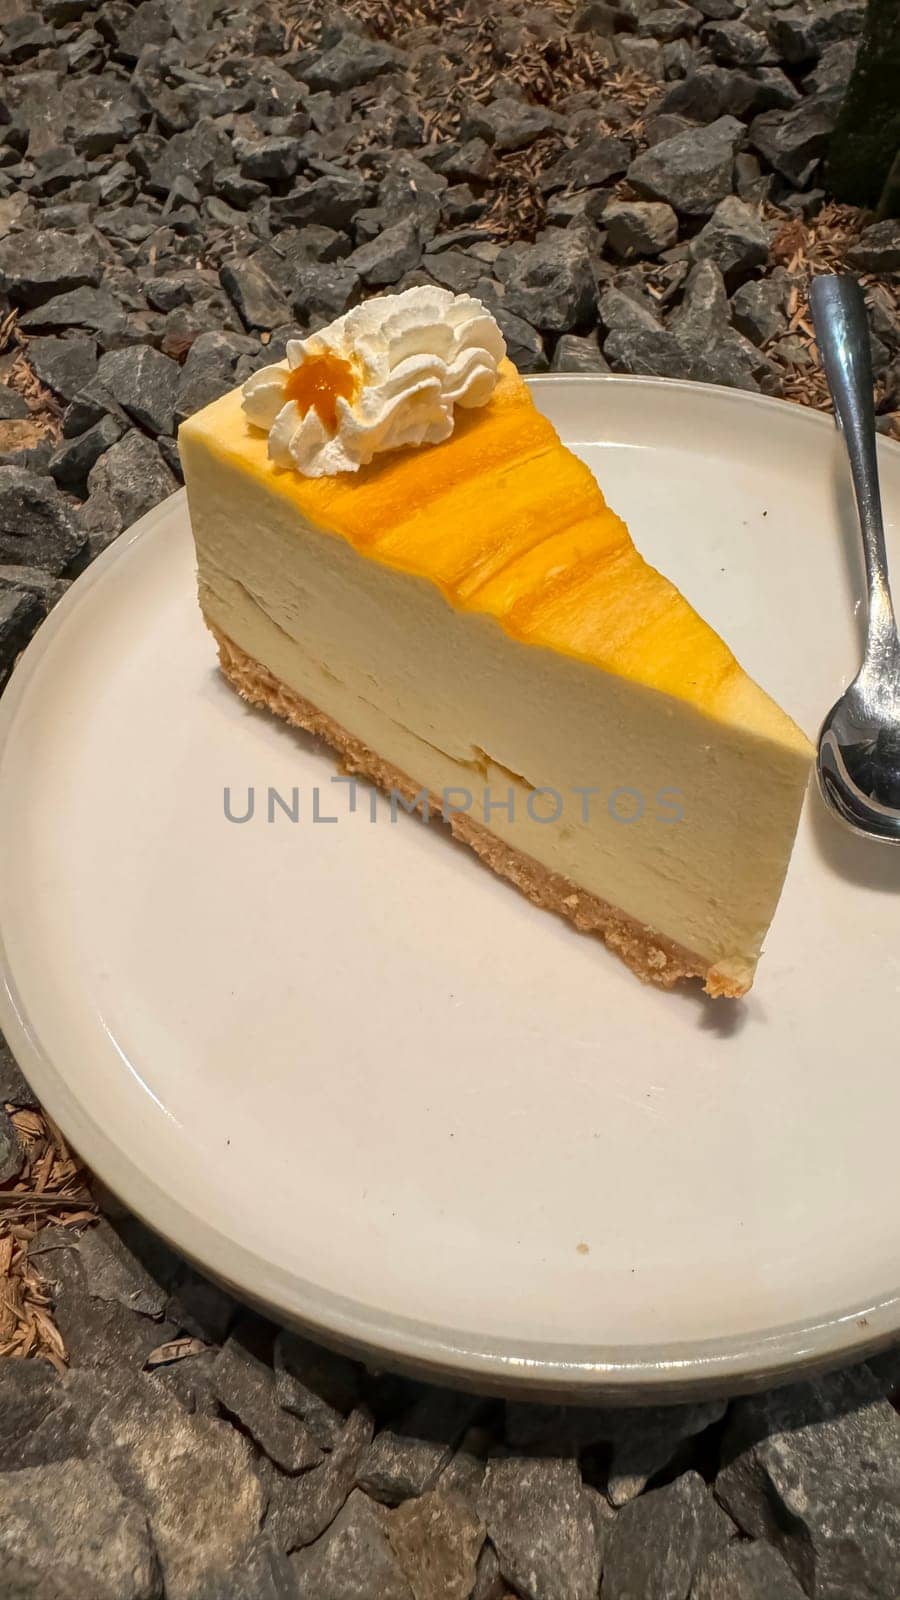 Lemon cheesecake freshly baked slice, New York style classical cheese cake on dessert plate background. Slice of tasty cake on white plate served with dessert spoon, good for cooking book